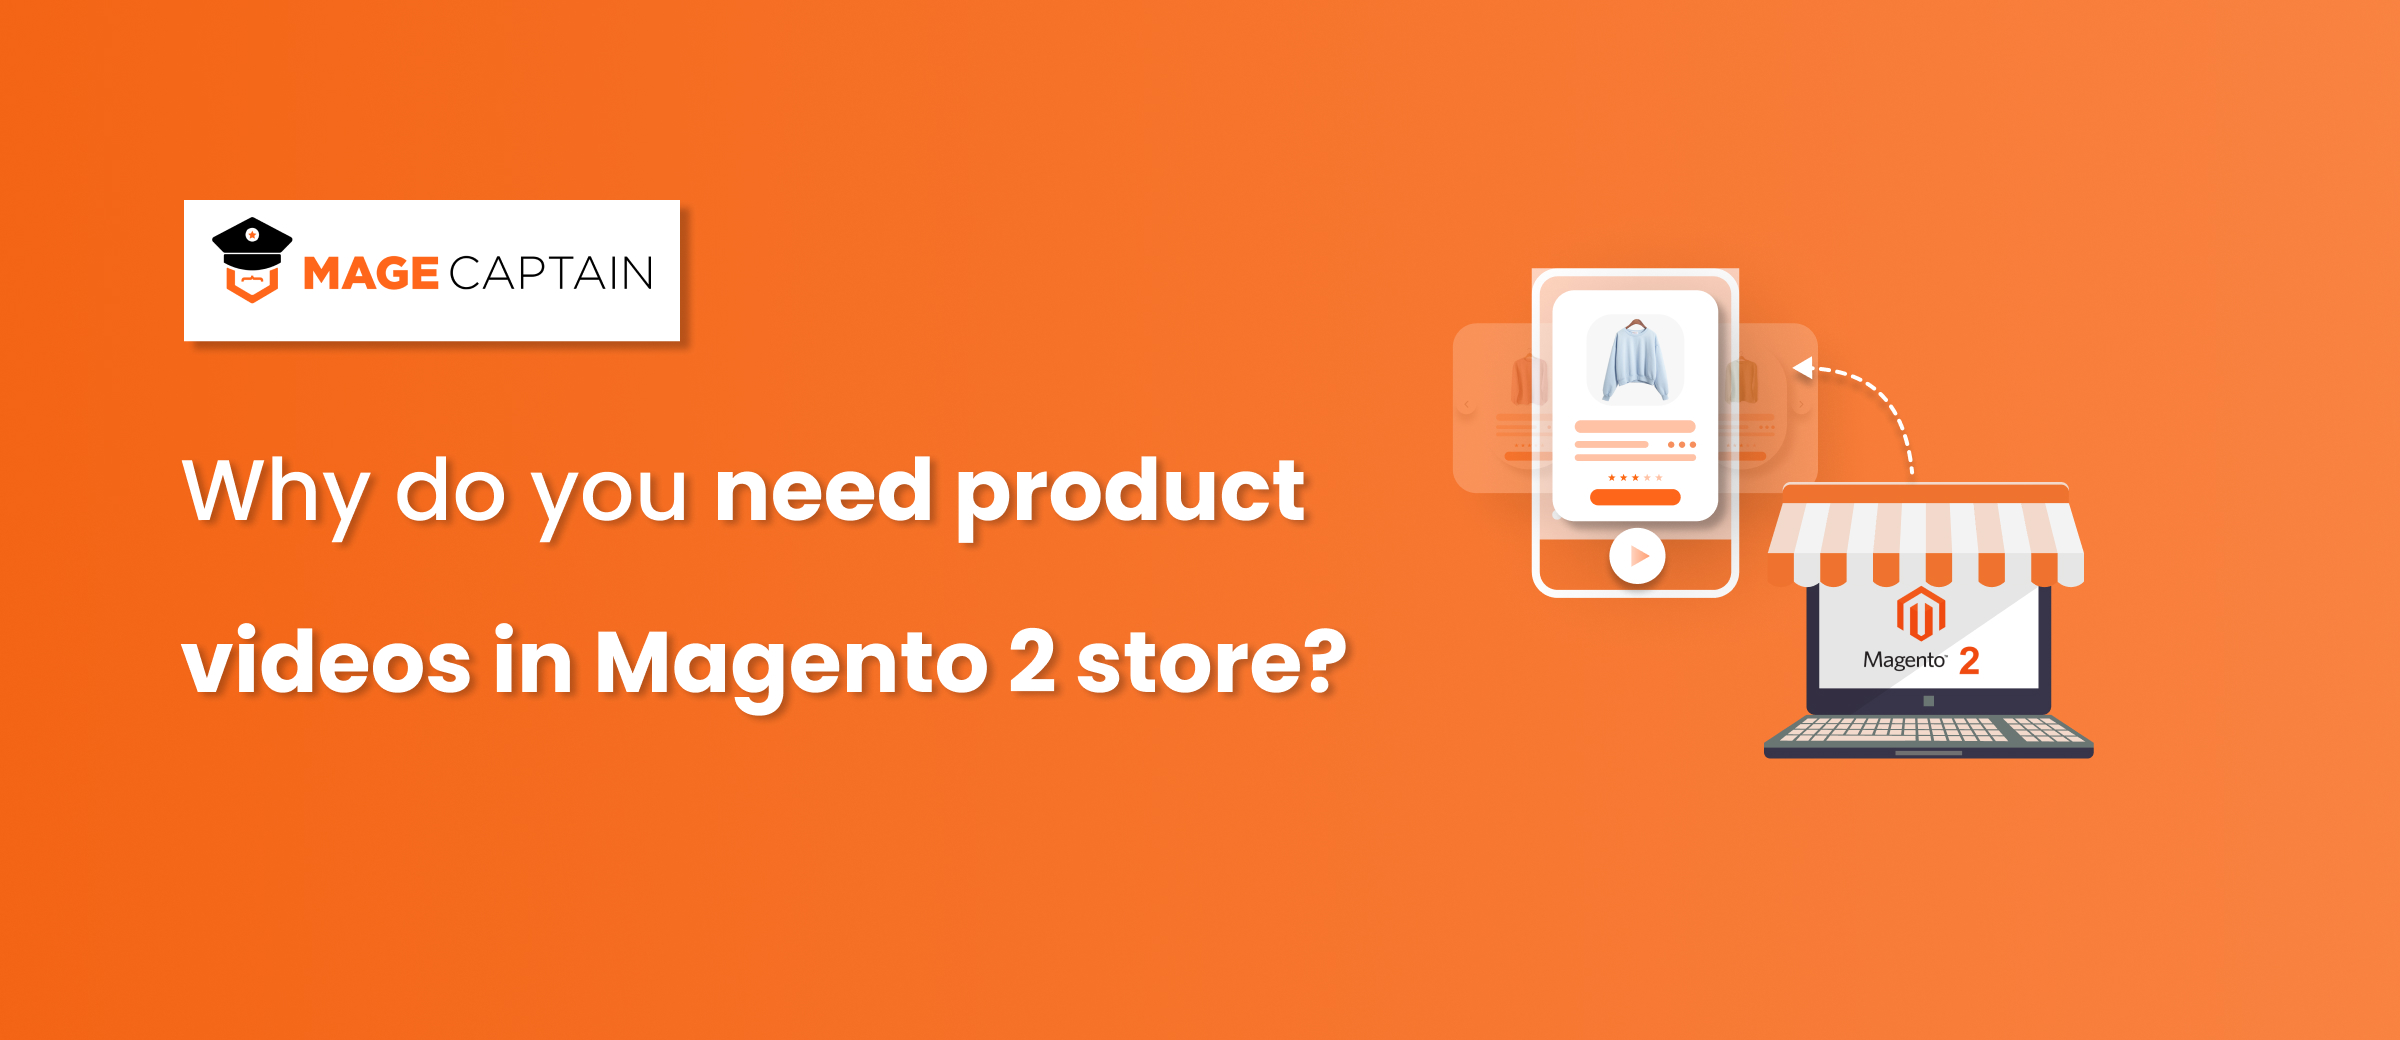 Why do you require a product video for Magento 2 store? 